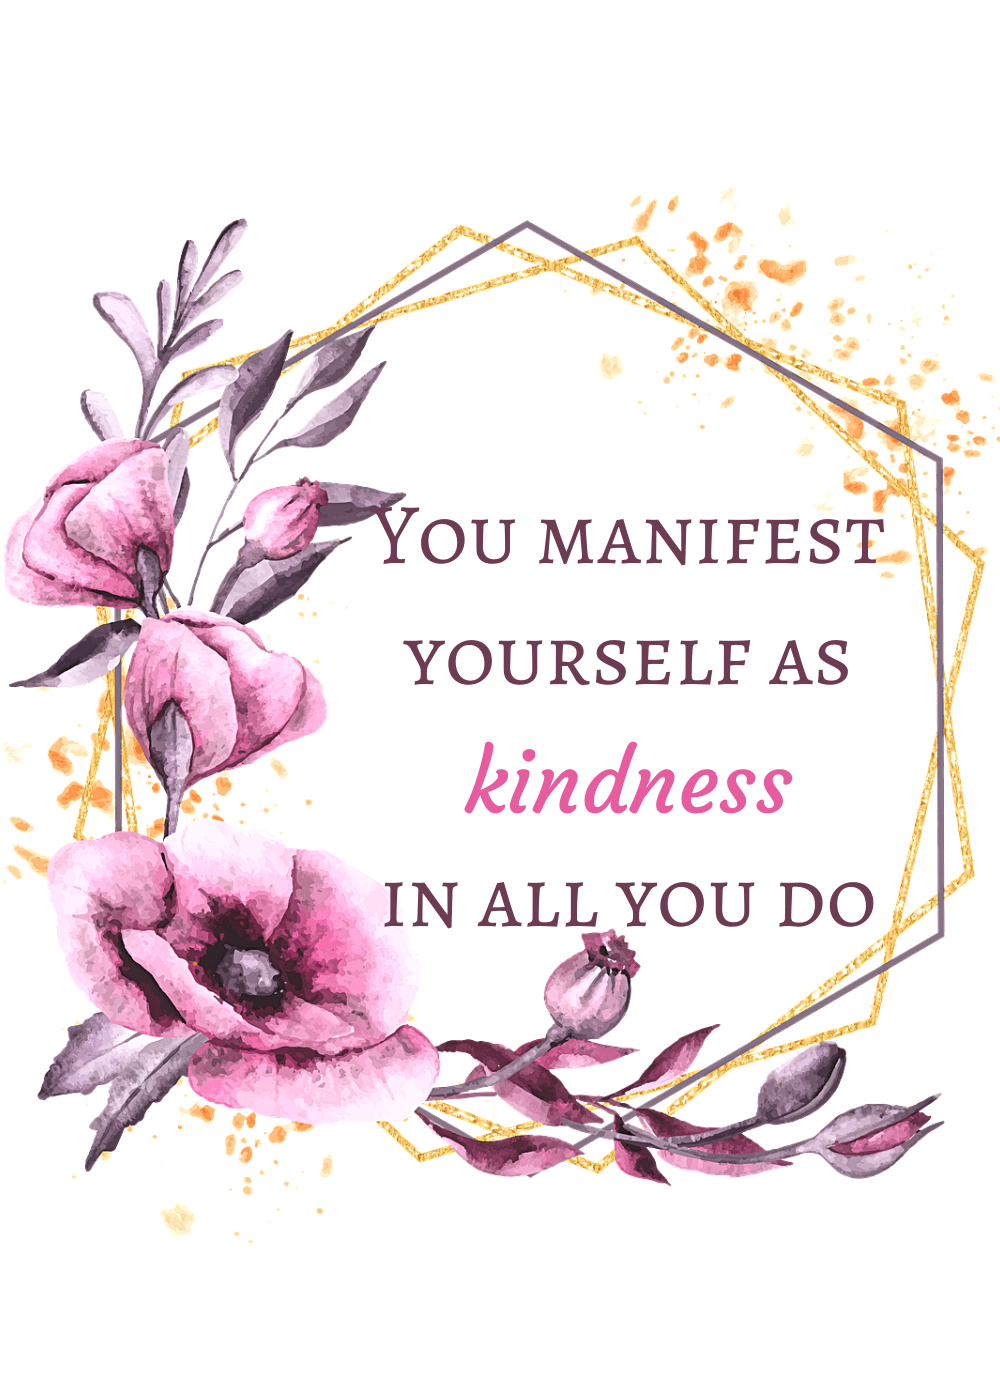 Kindness Manifest in all you do